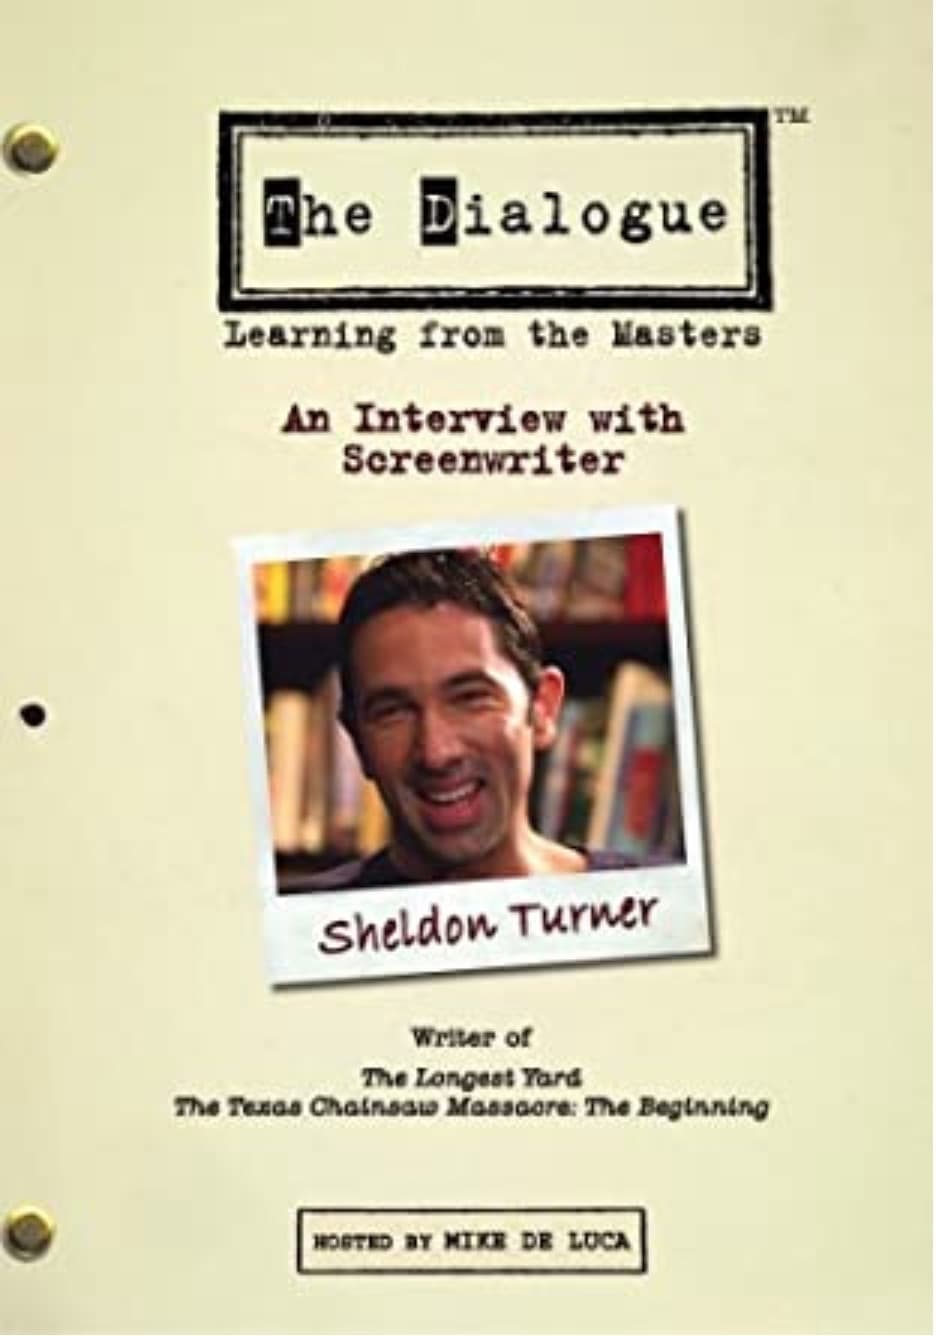 The Dialogue: An Interview with Screenwriter Sheldon Turner (2006)